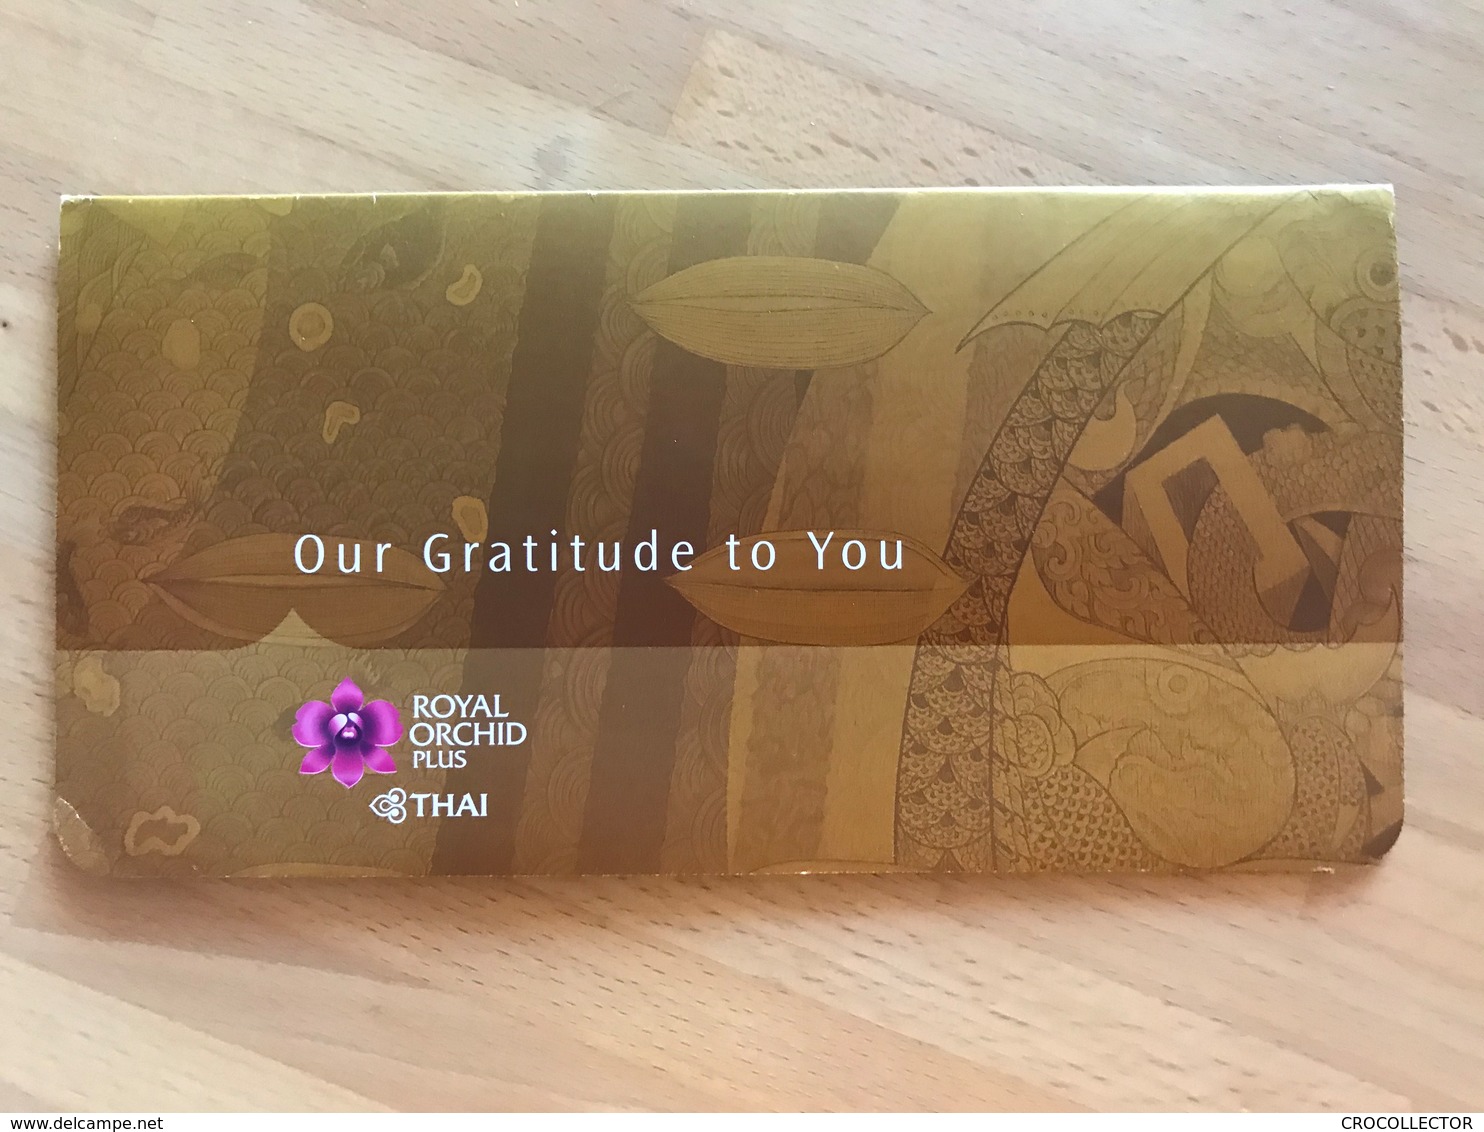 THAI AIRWAYS BIRTHDAY UPGRADE VOUCHER AWARD FOR FREQUENT FLYER ROYAL ORCHID PLUS GOLD GOLD CARD HOLDERS - Cadeaux Promotionnels